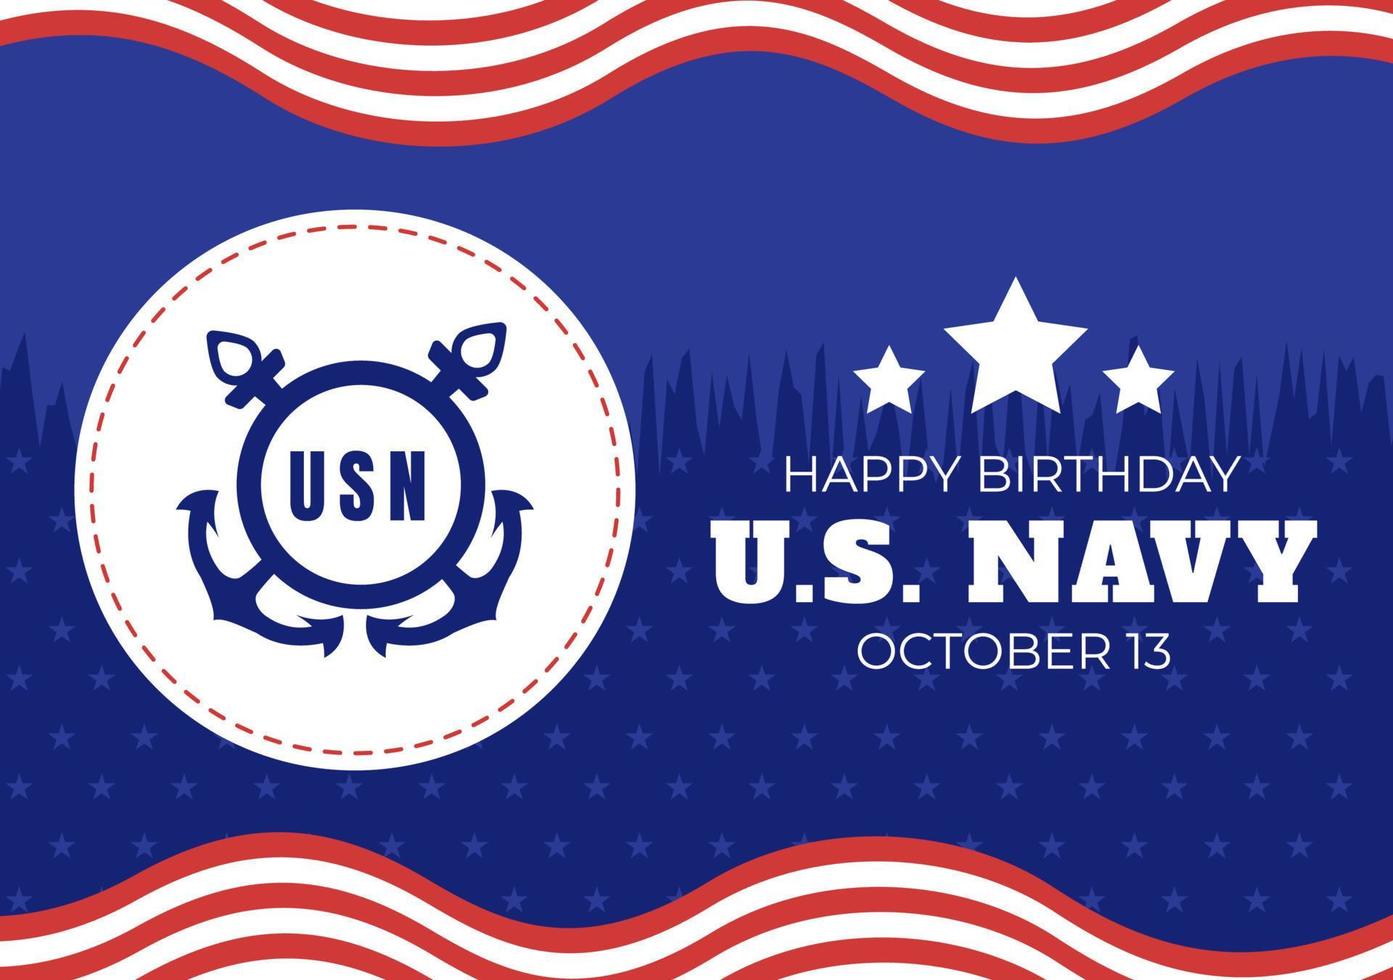 U.S. Navy Birthday on October 13th Hand Drawn Cartoon Flat  Illustration Suitable for Poster, Banners and Greeting Card in Background Style vector